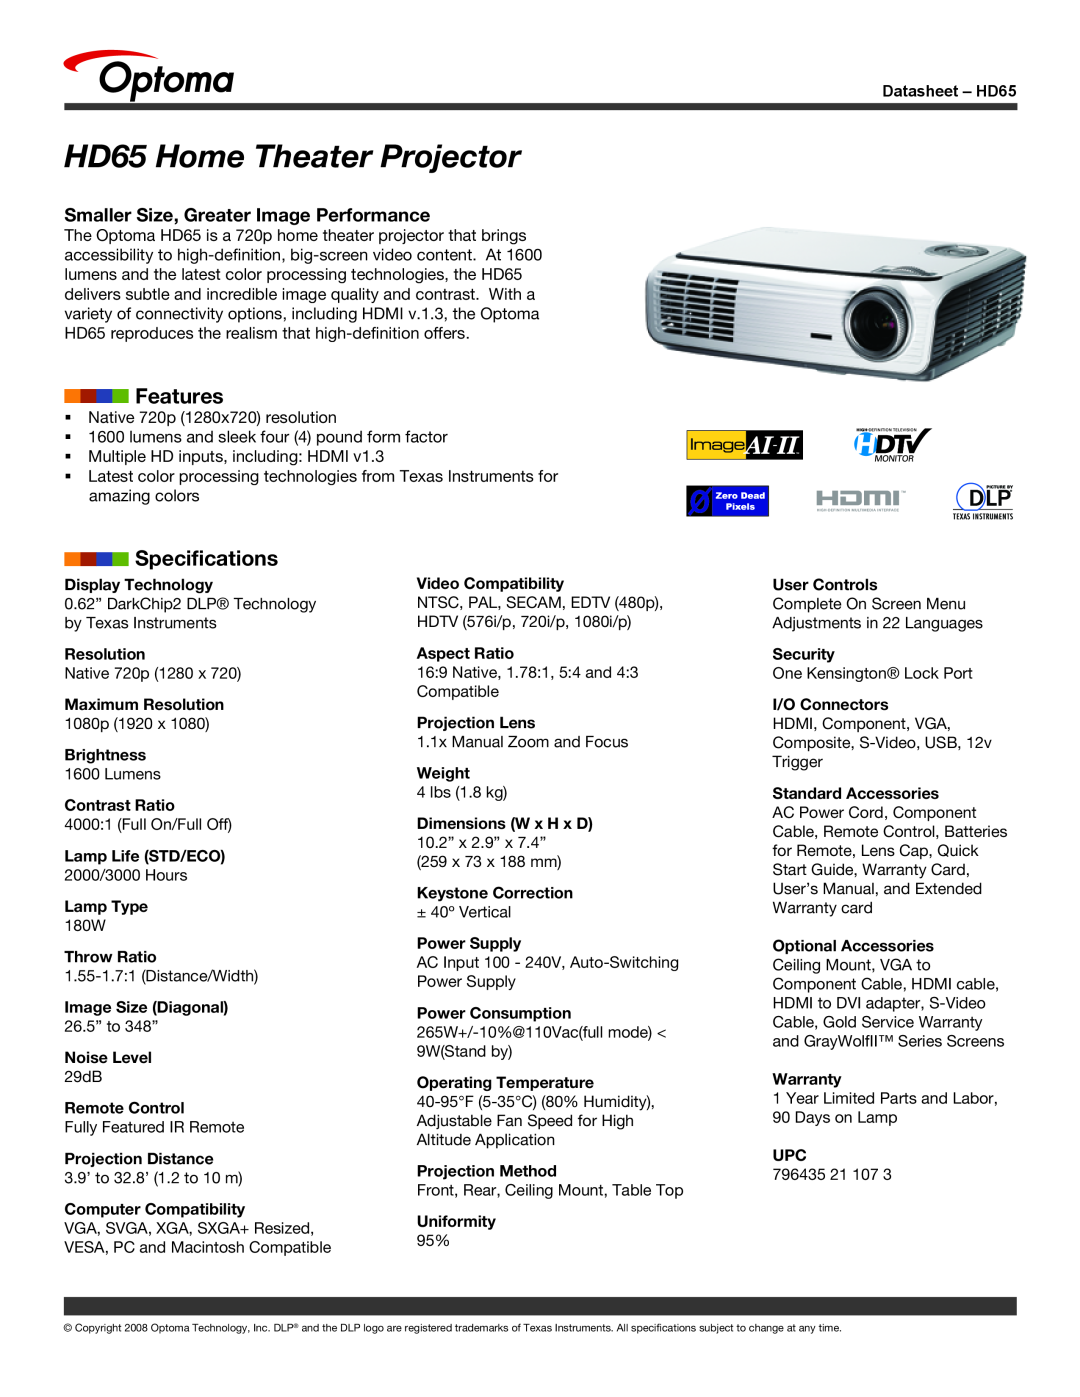 Optoma Technology specifications HD65 - Home Theater Projector, Live The High-Definition Lifestyle, Features 